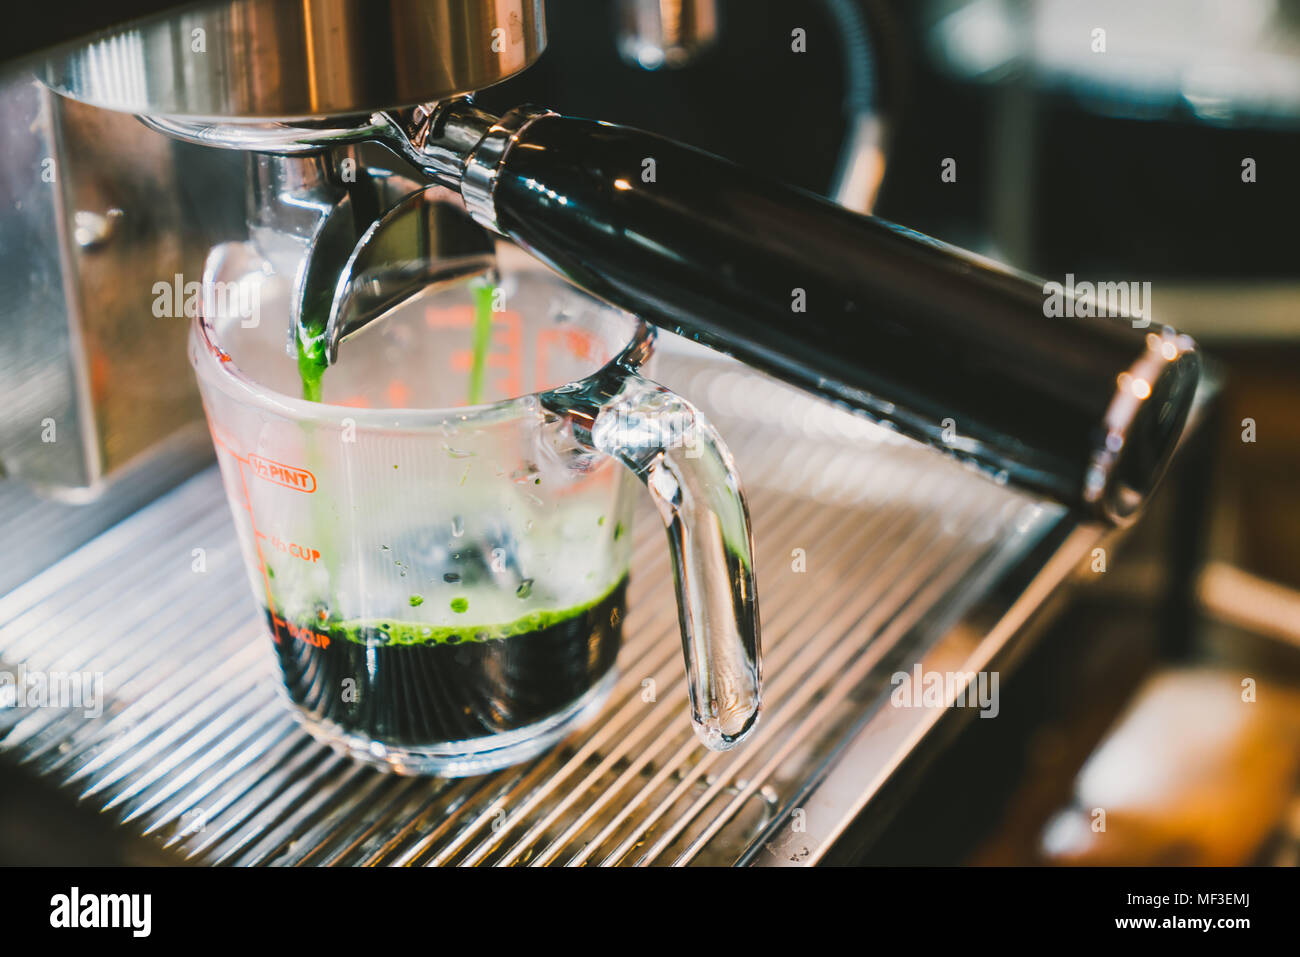 https://c8.alamy.com/comp/MF3EMJ/barista-making-hot-green-tea-using-coffee-maker-machine-close-up-on-the-measure-scale-glass-cafe-lifestyle-food-and-drink-small-business-concept-MF3EMJ.jpg